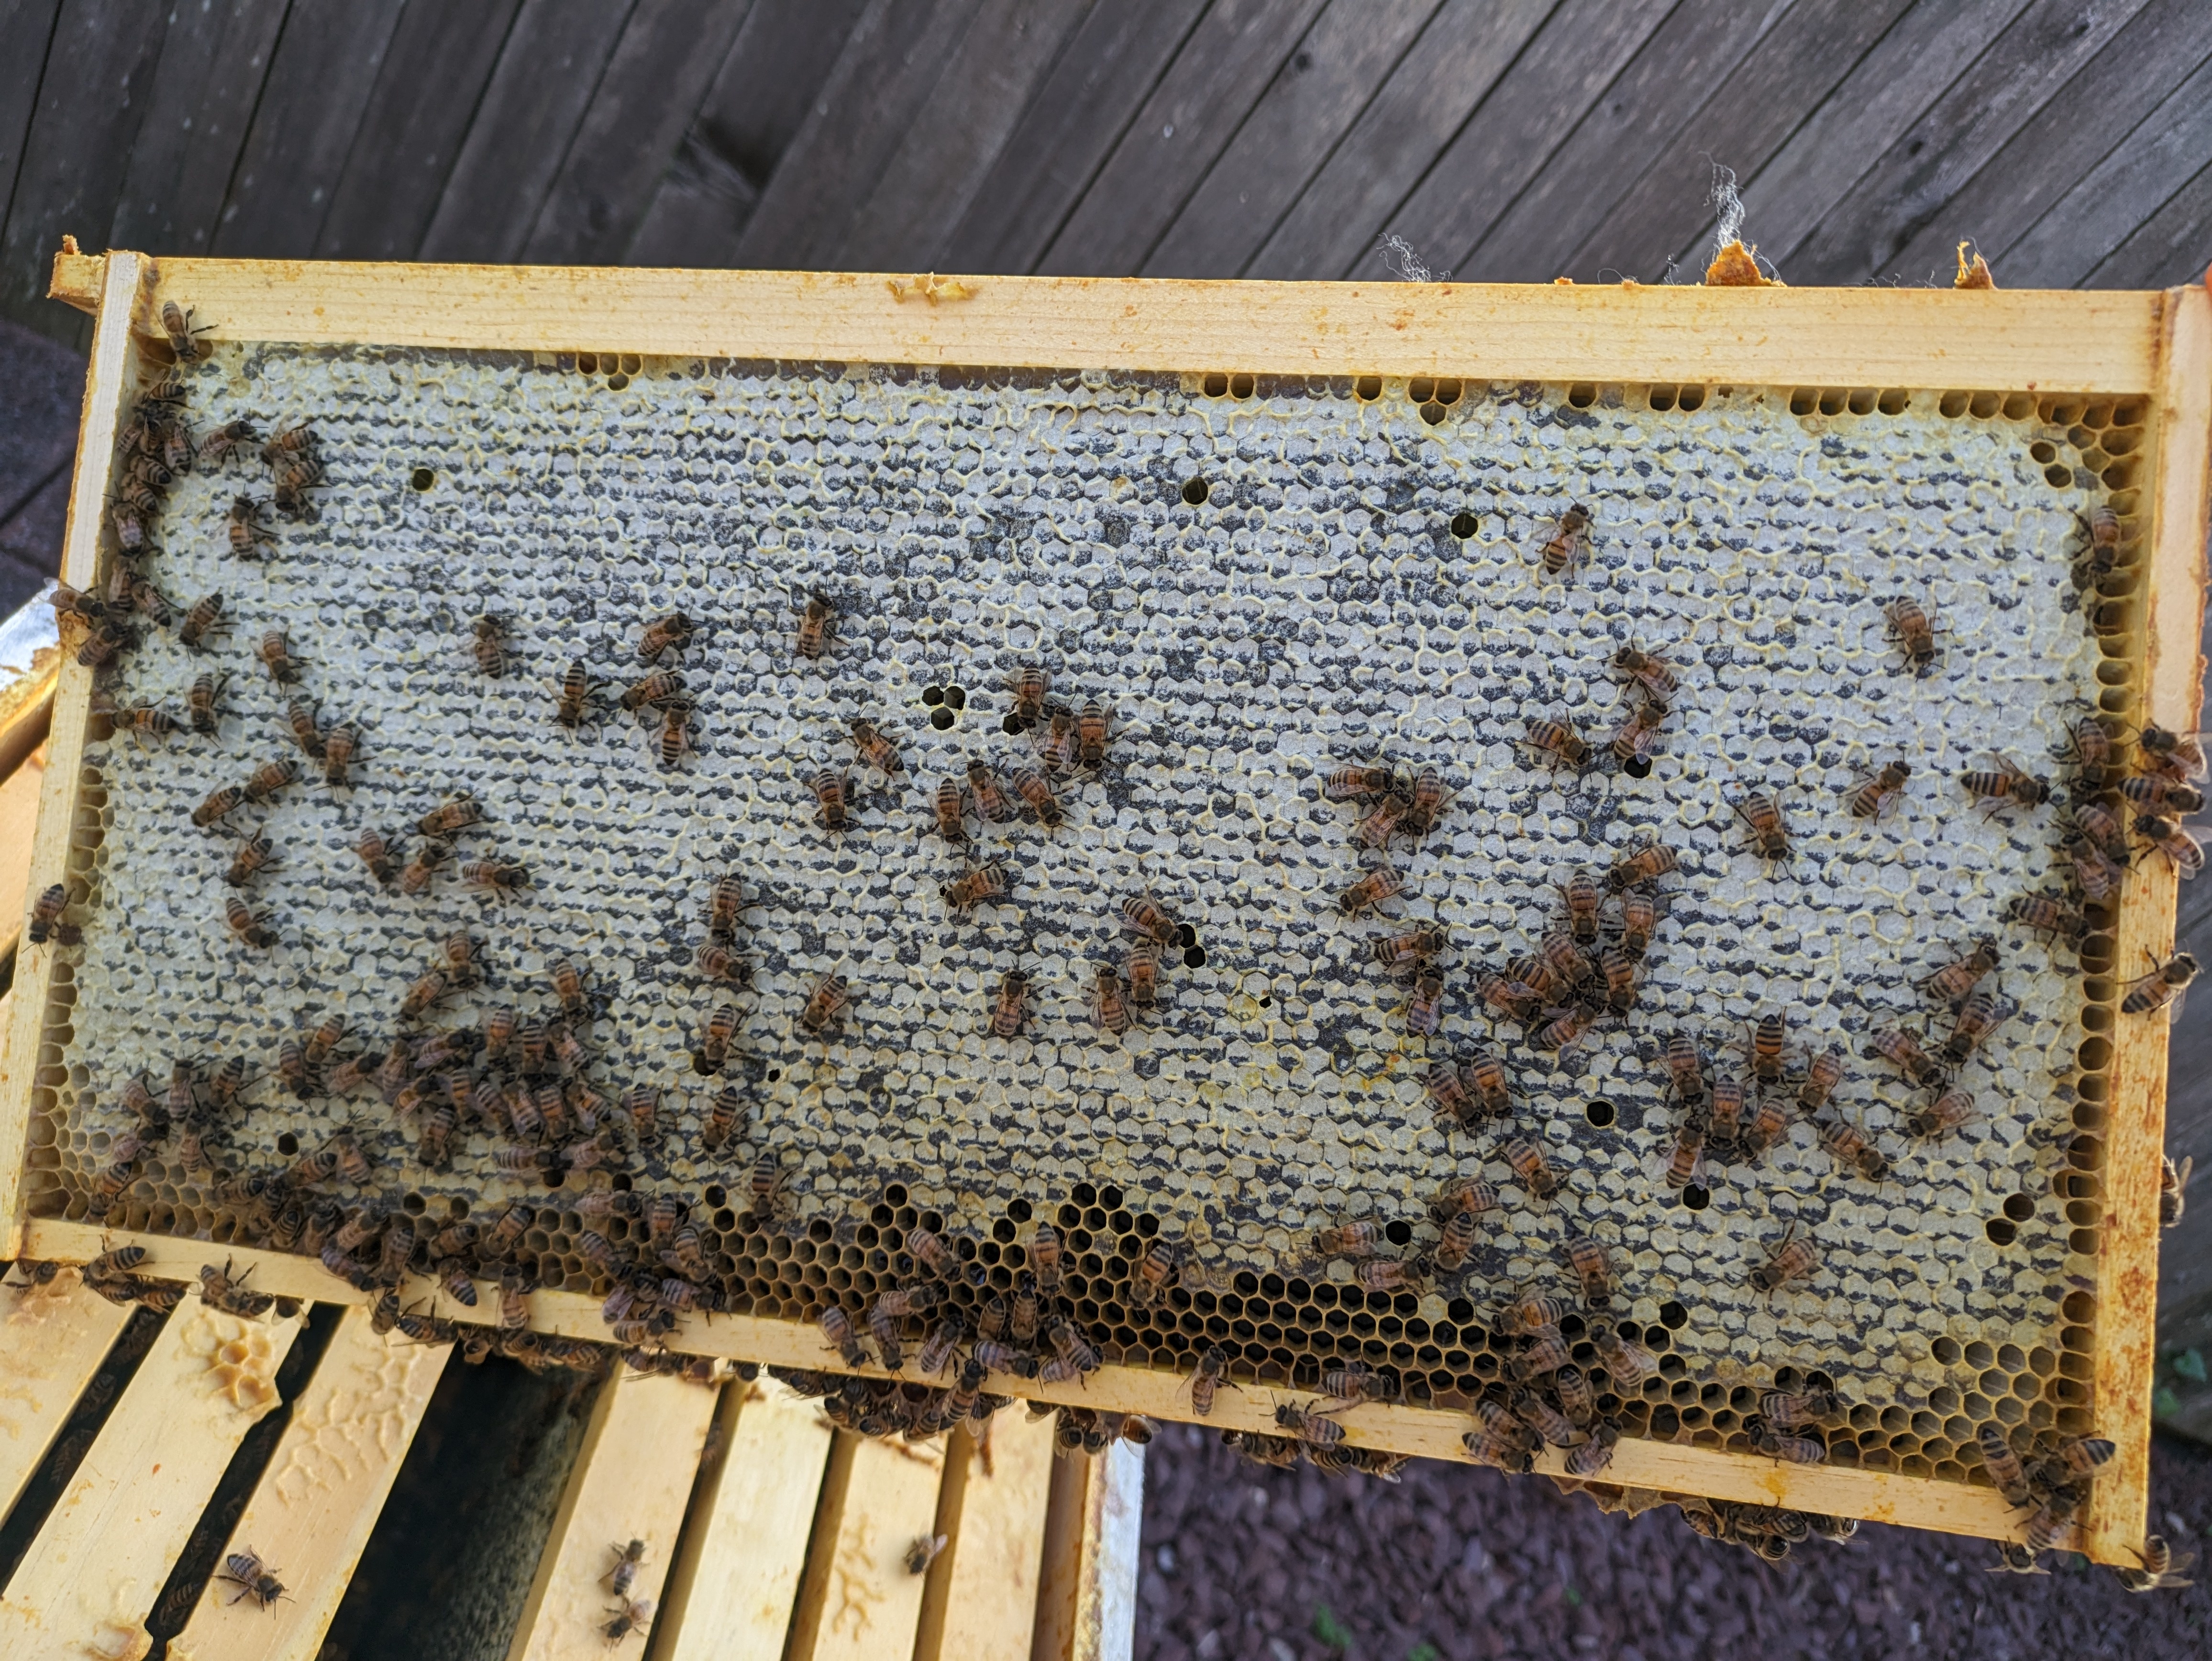 Full deep frame containing capped honey stores for the winter